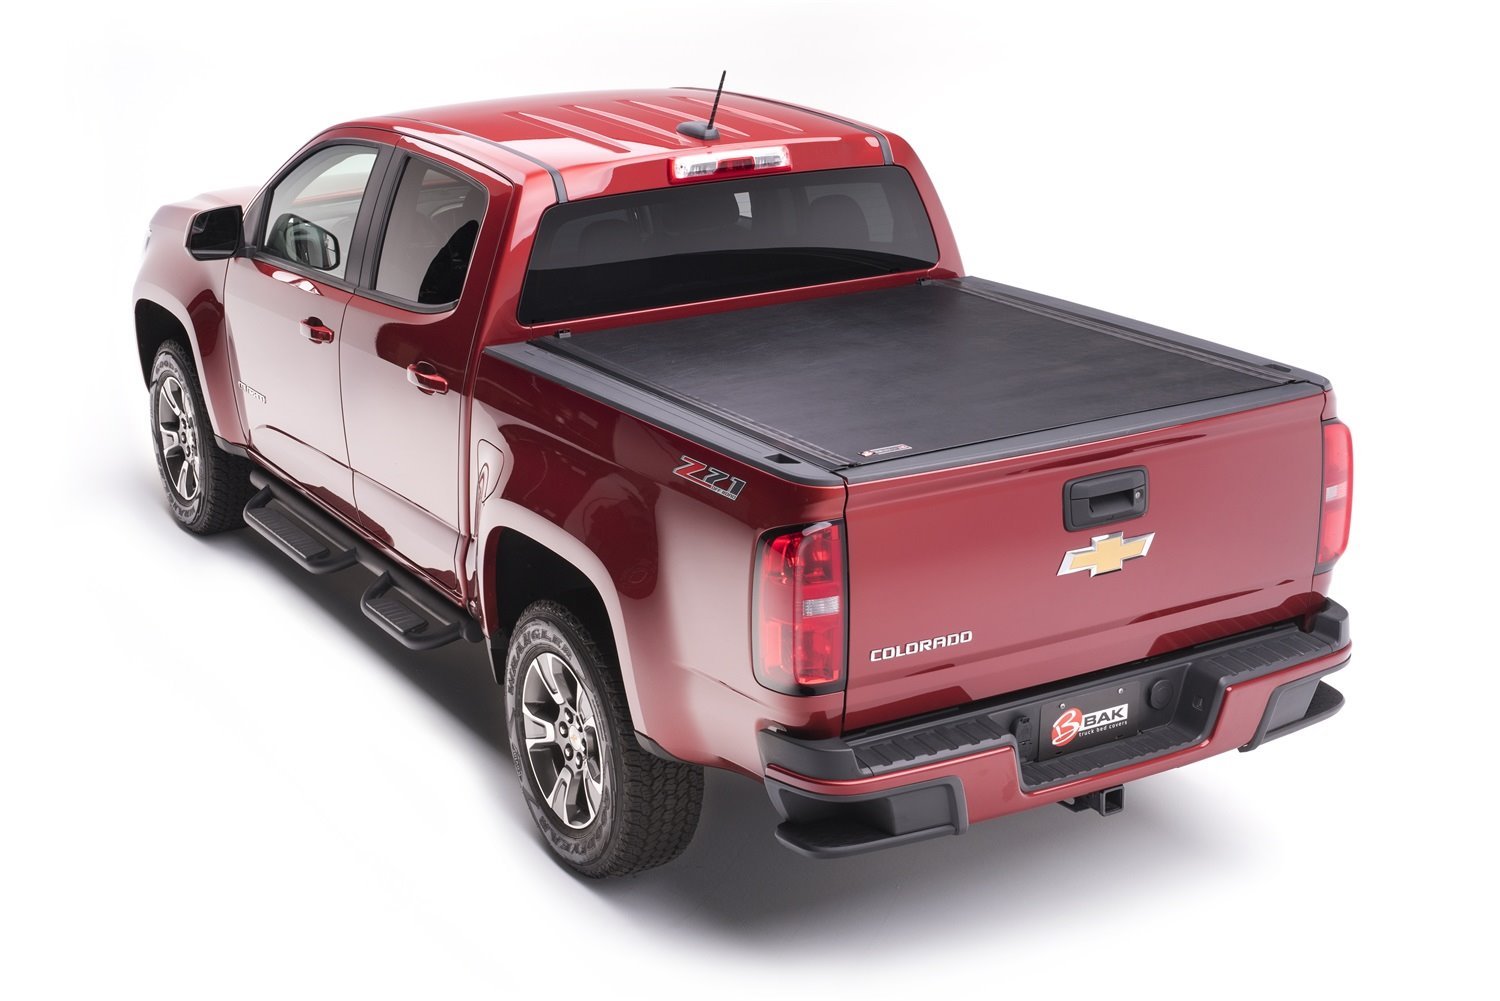 39146 Revolver X2 for Fits Select GM Canyon/Colorado 5.2 ft. Bed, Roll-Up Hard Cover Style [Black Finish]